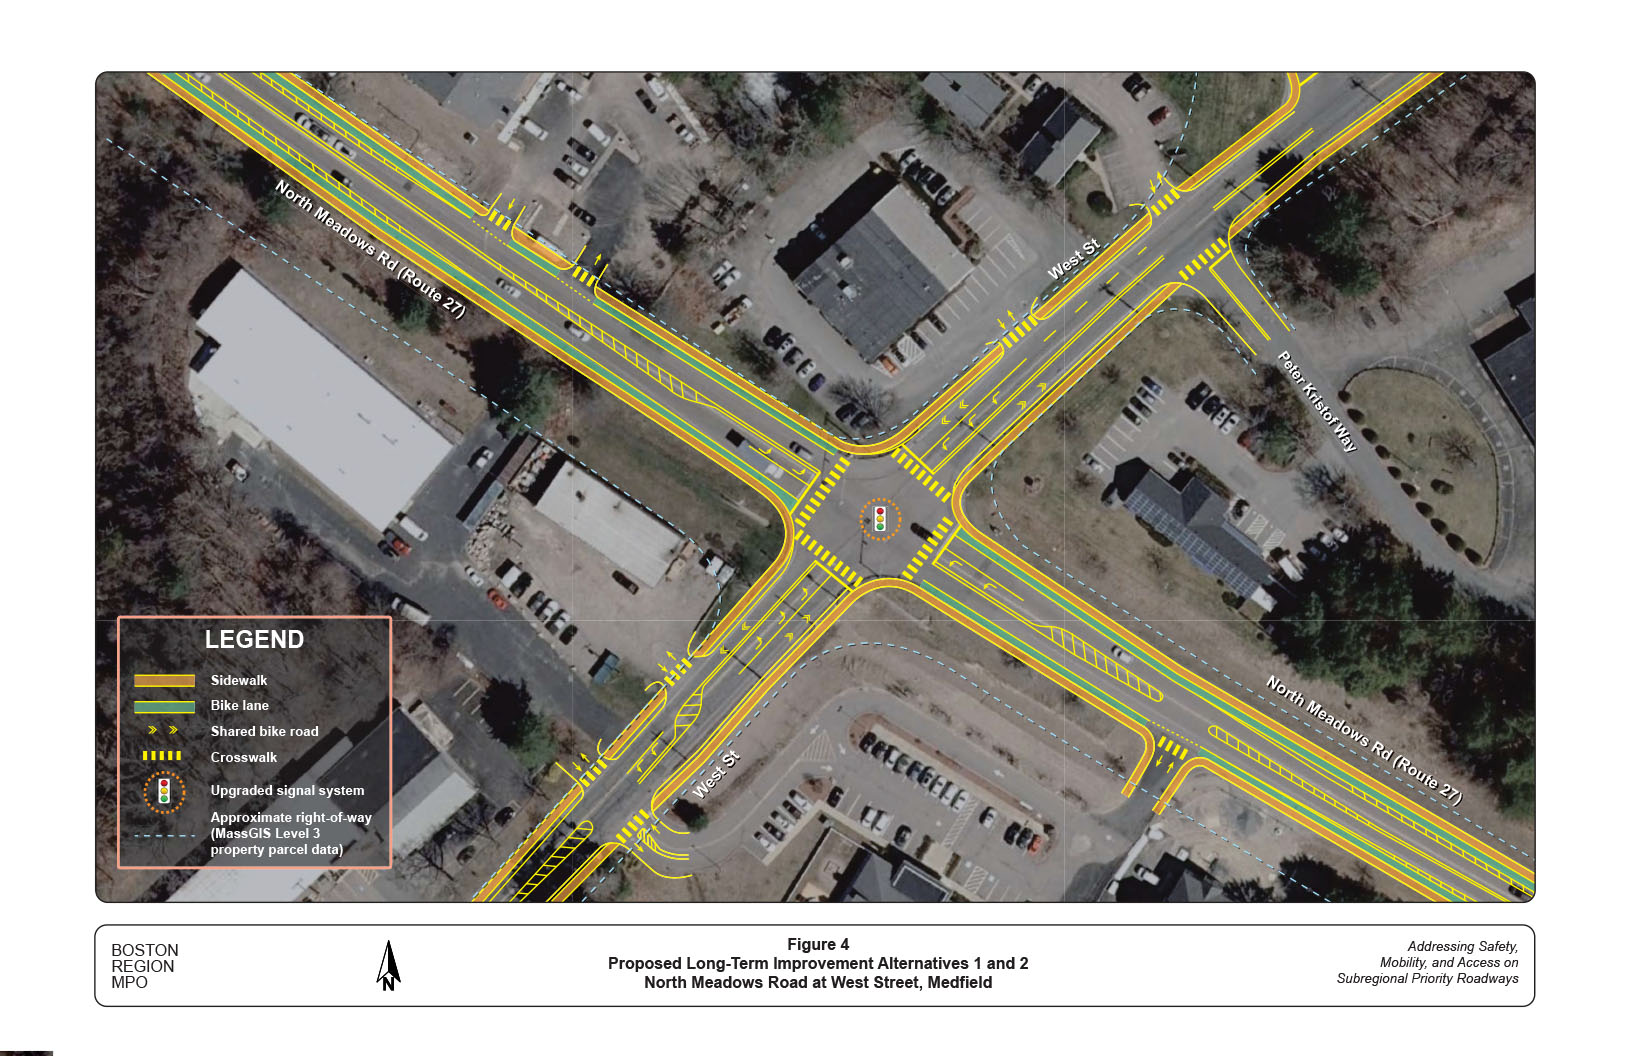 Figure 4: Proposed Long-Term Improvement Alternatives 1 and 2
This figure shows a conceptual plan view of the proposed intersection modifications in Alternatives 1 and 2.
